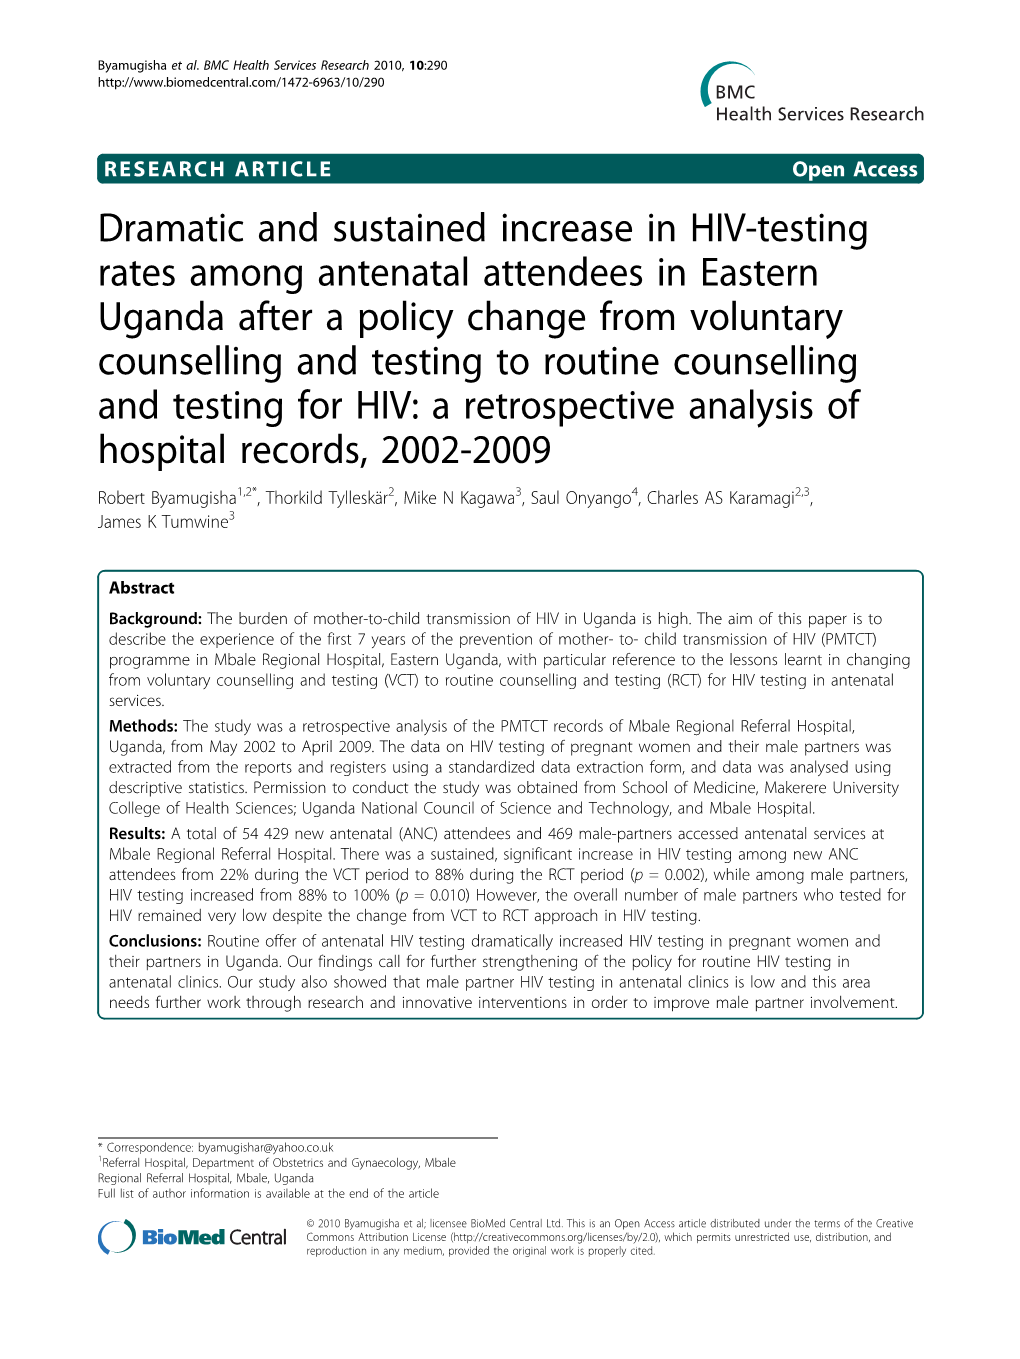 Dramatic and Sustained Increase in HIV-Testing Rates Among Antenatal